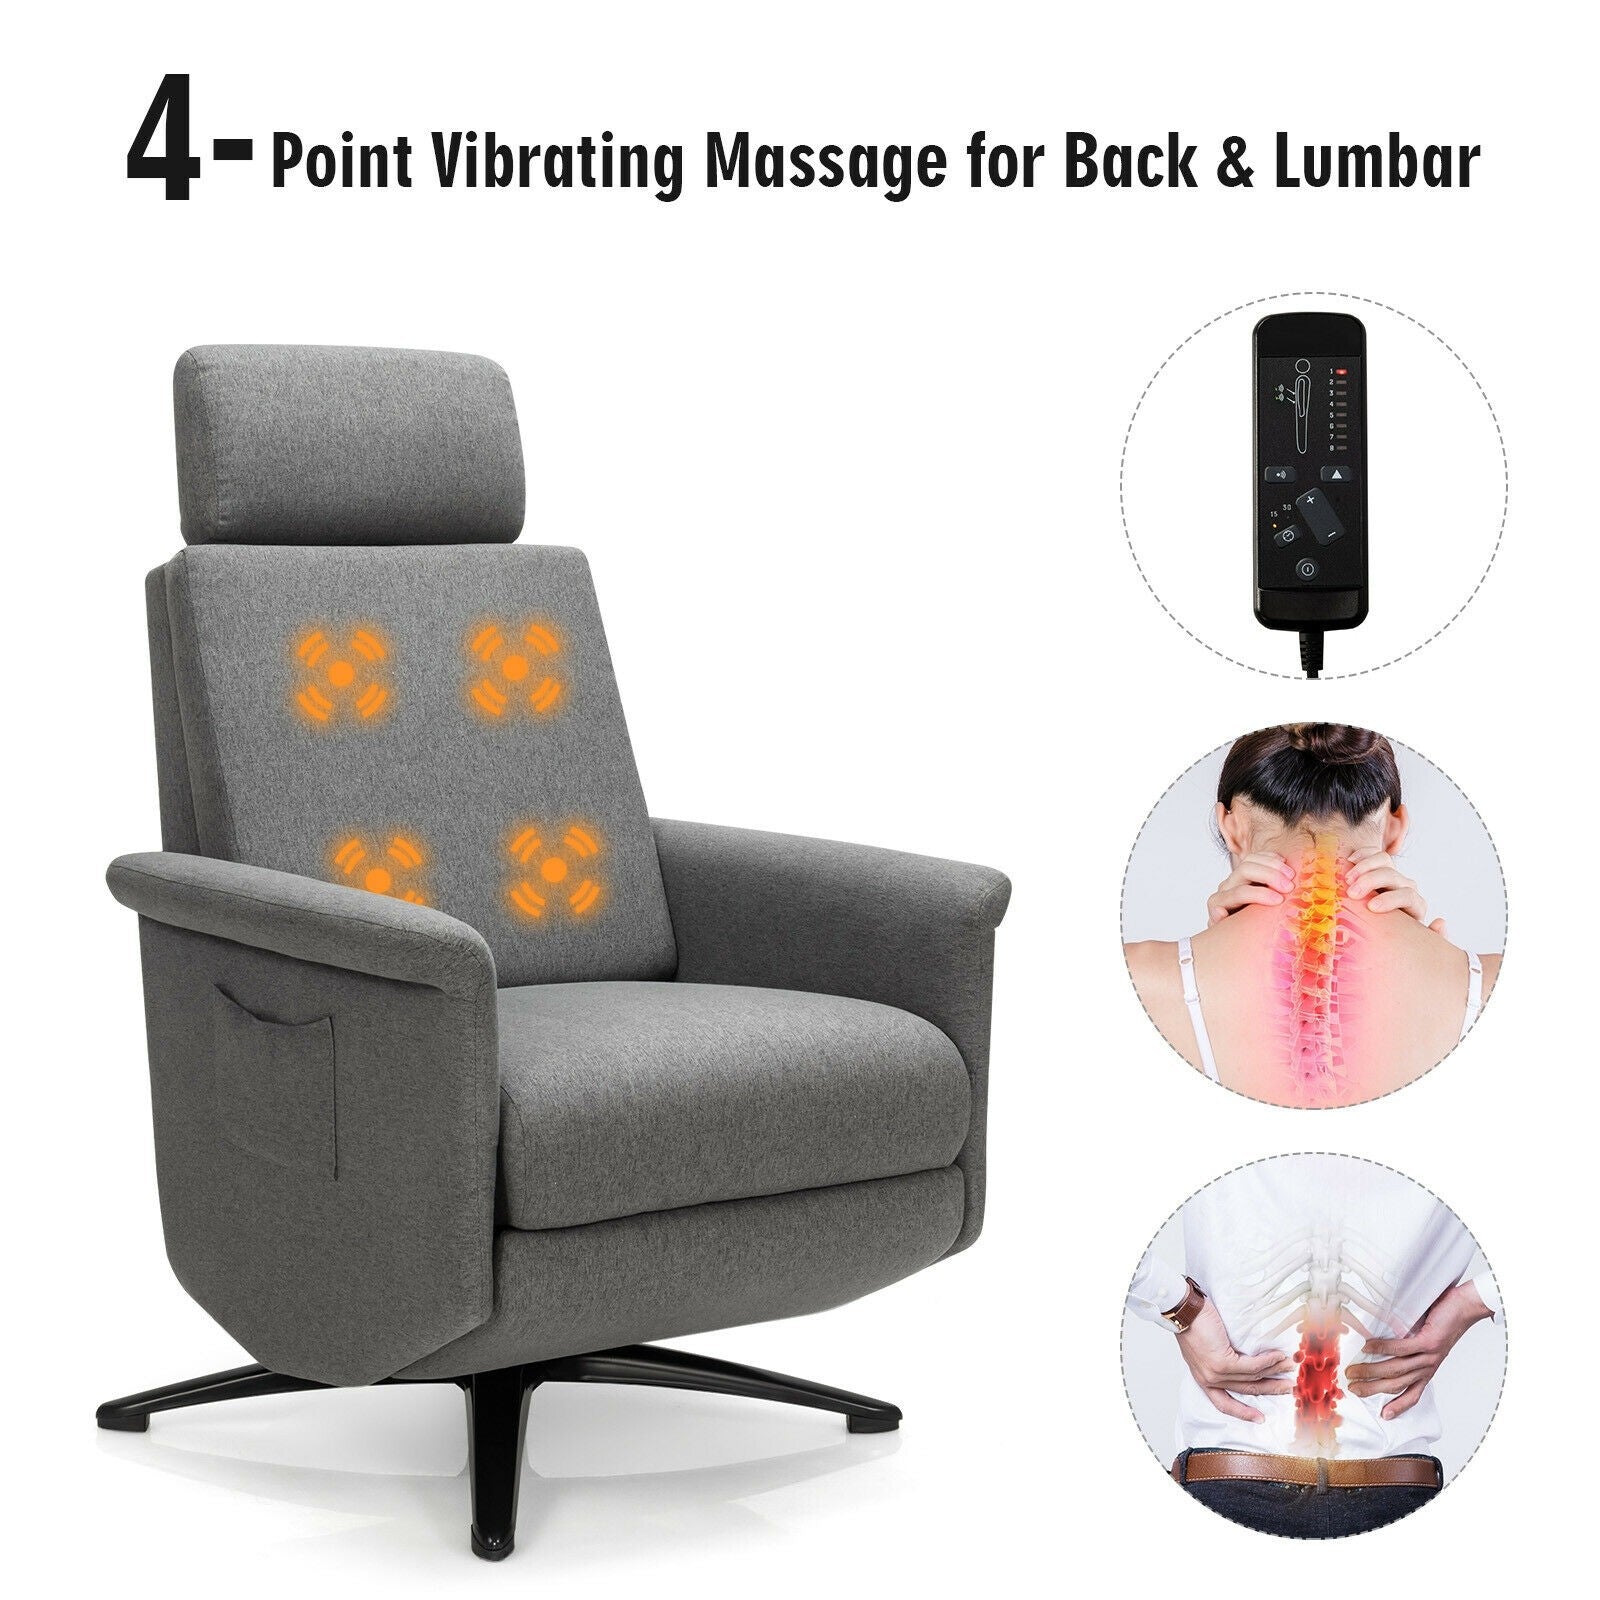 Recliner Chair with Vibration Massage, 360 Degree Swivel Reclining Sofa Chair, Adjustable Headrest & Footrest